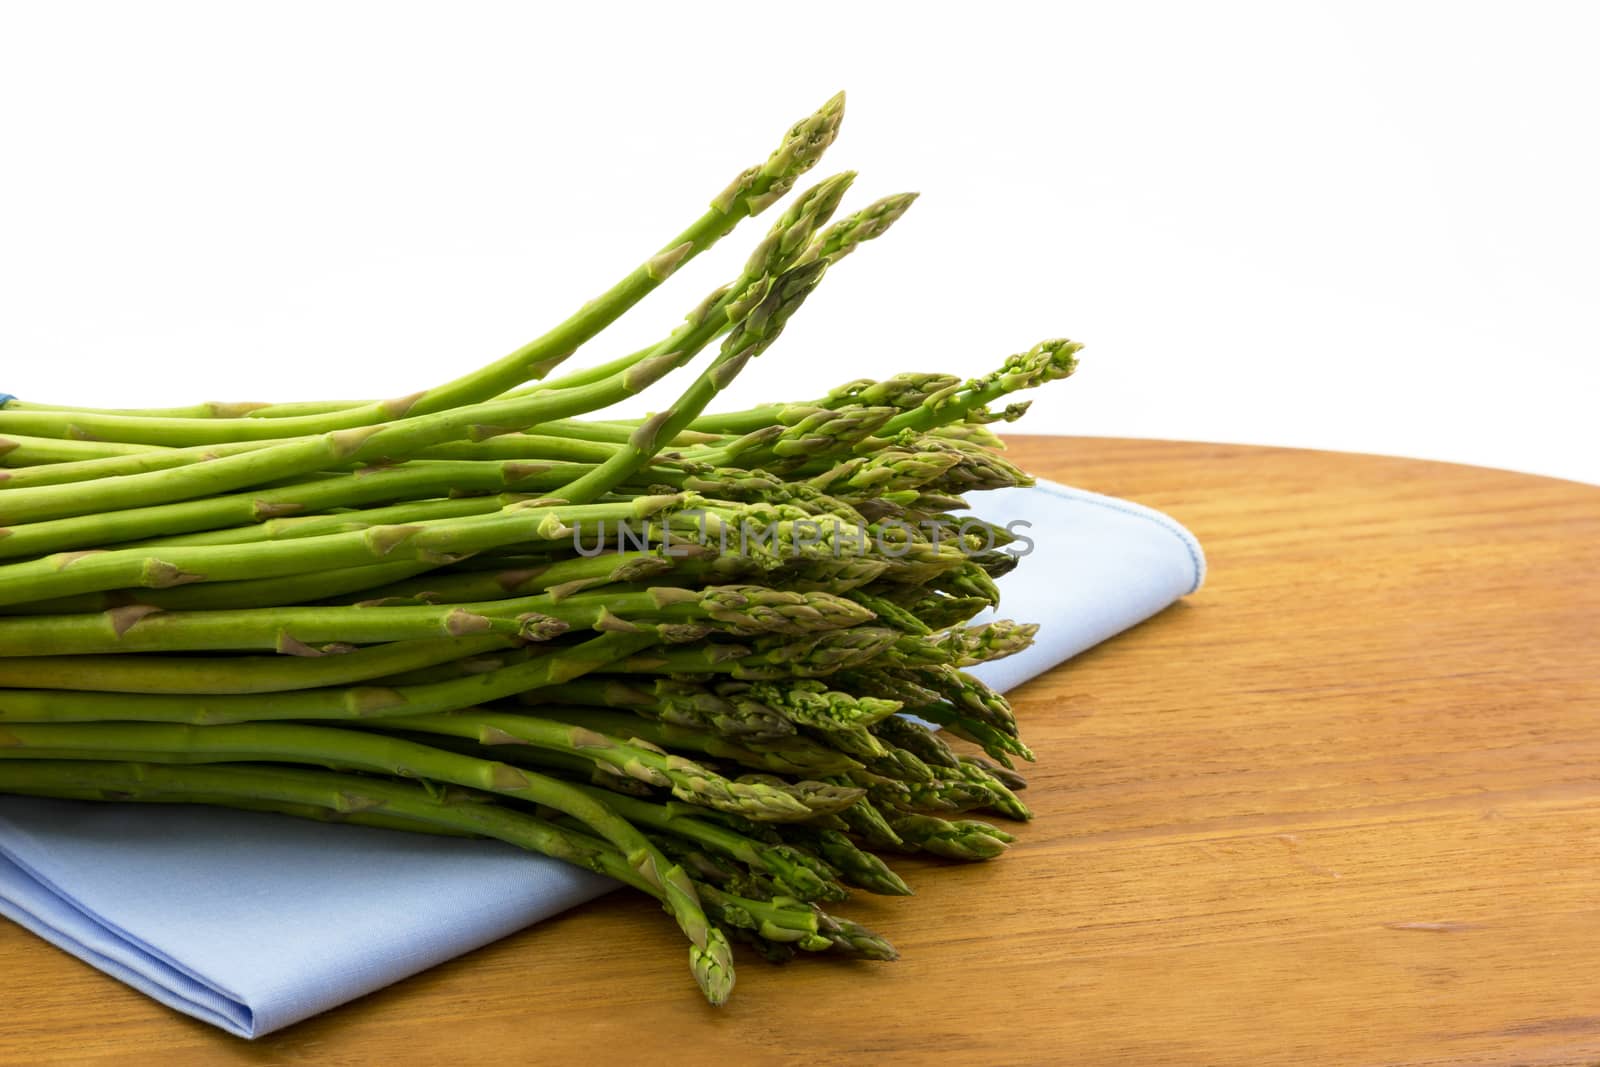 Fresh, uncooked asparagus placed on pale blue napkin  and wood board.  Horizontal image of garden vegetable with copy space. 